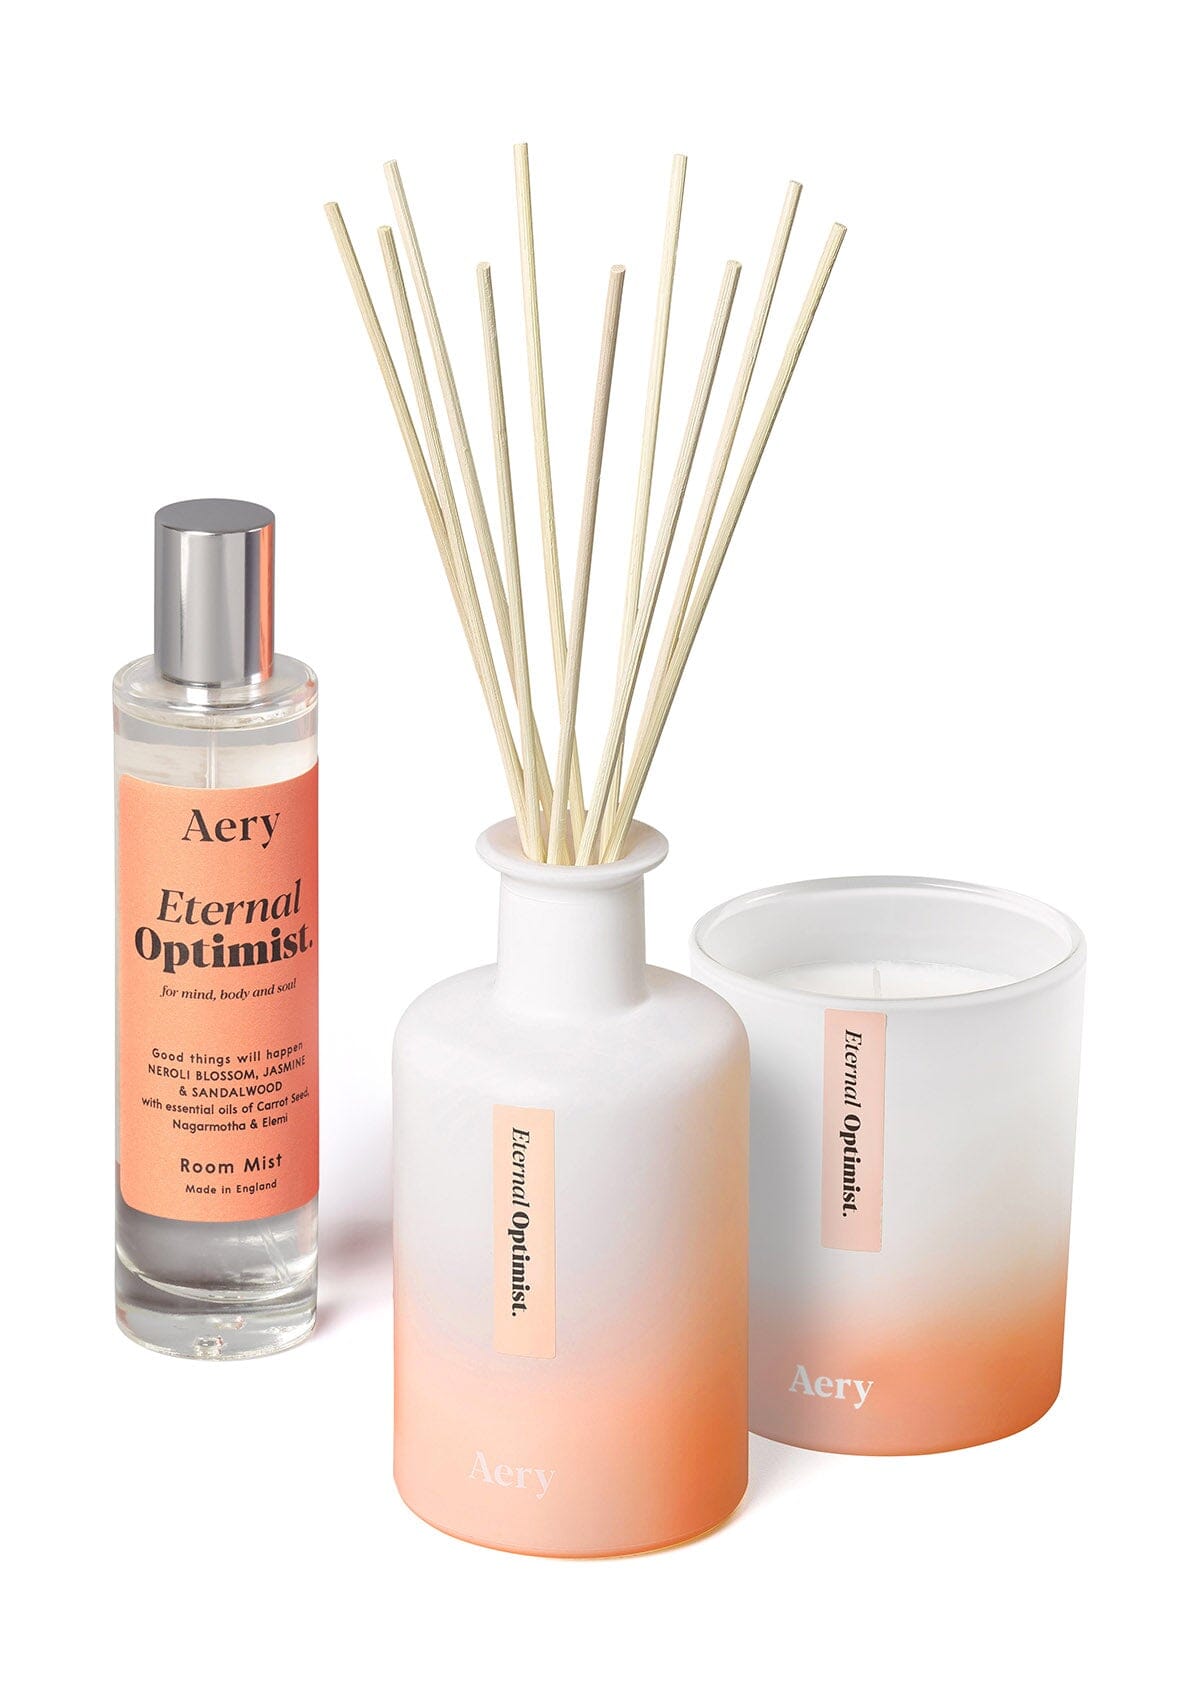 Orange Eternal Optimist diffuser, room mist and candle by aery displayed on white background 